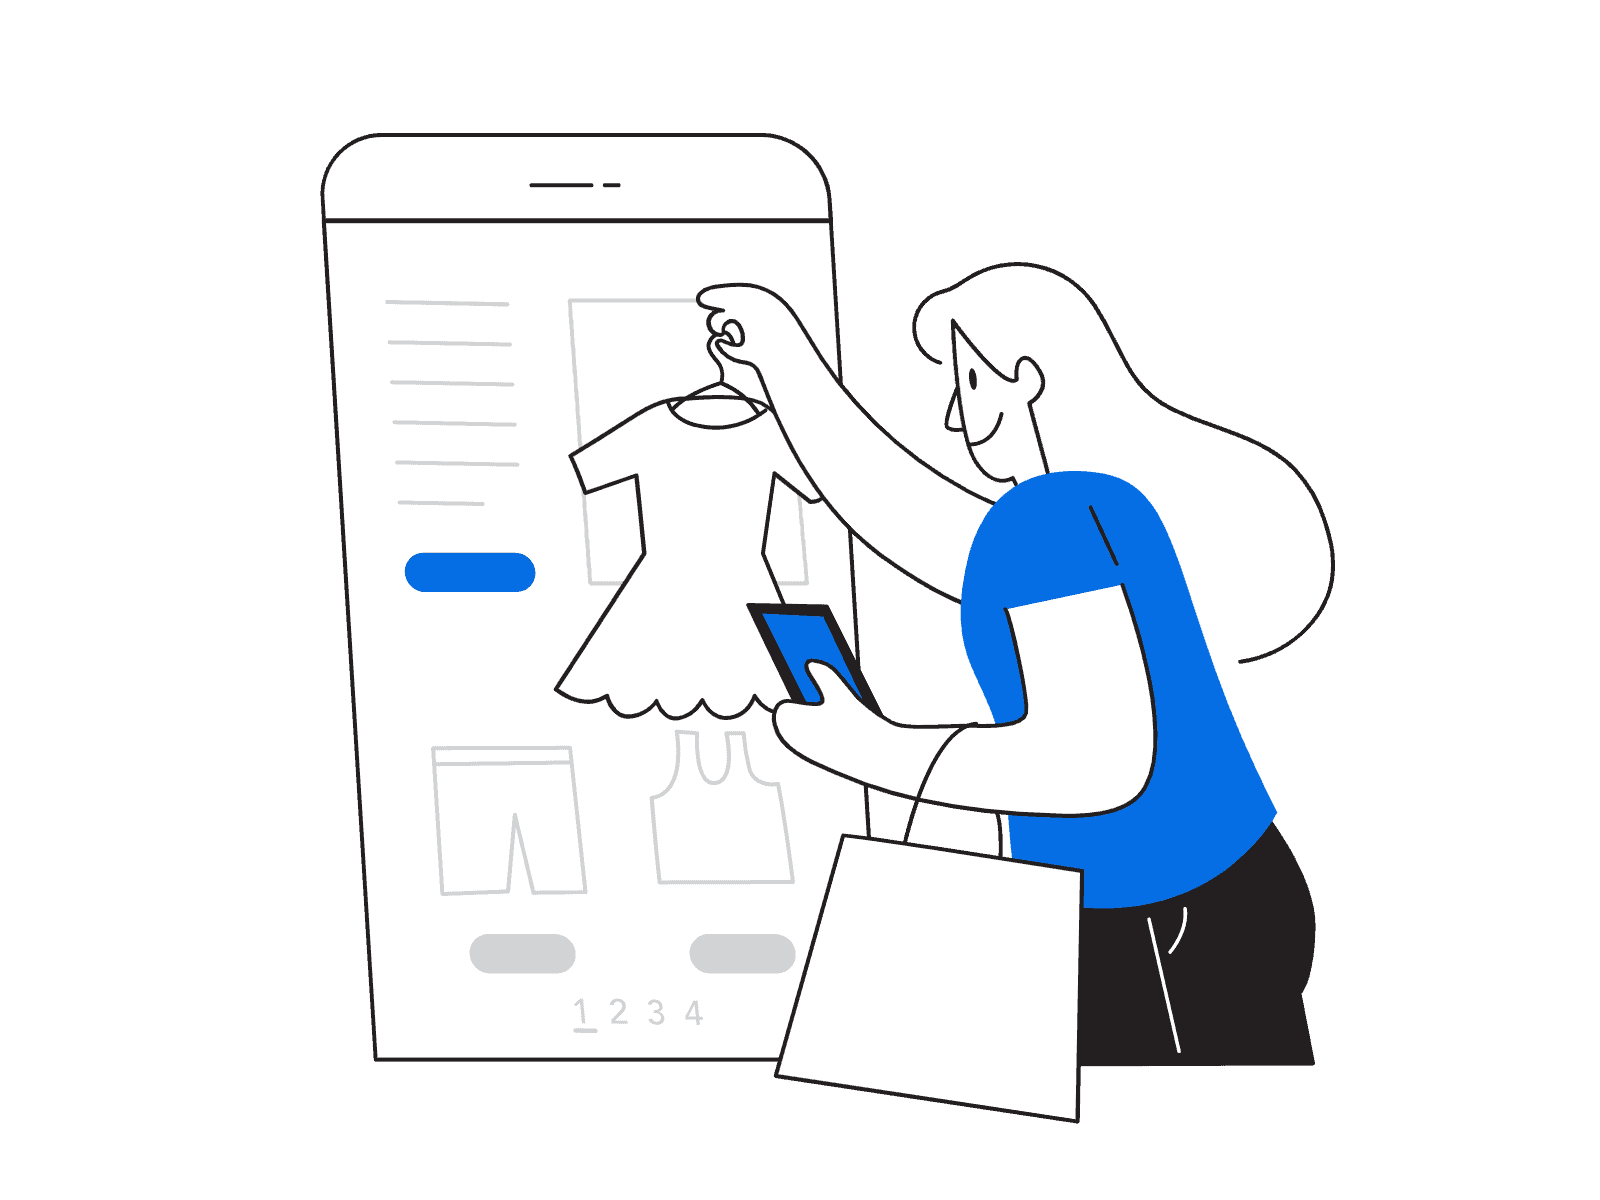 An illustration of a woman comparing pricing options on her phone while looking at a shopping cart.